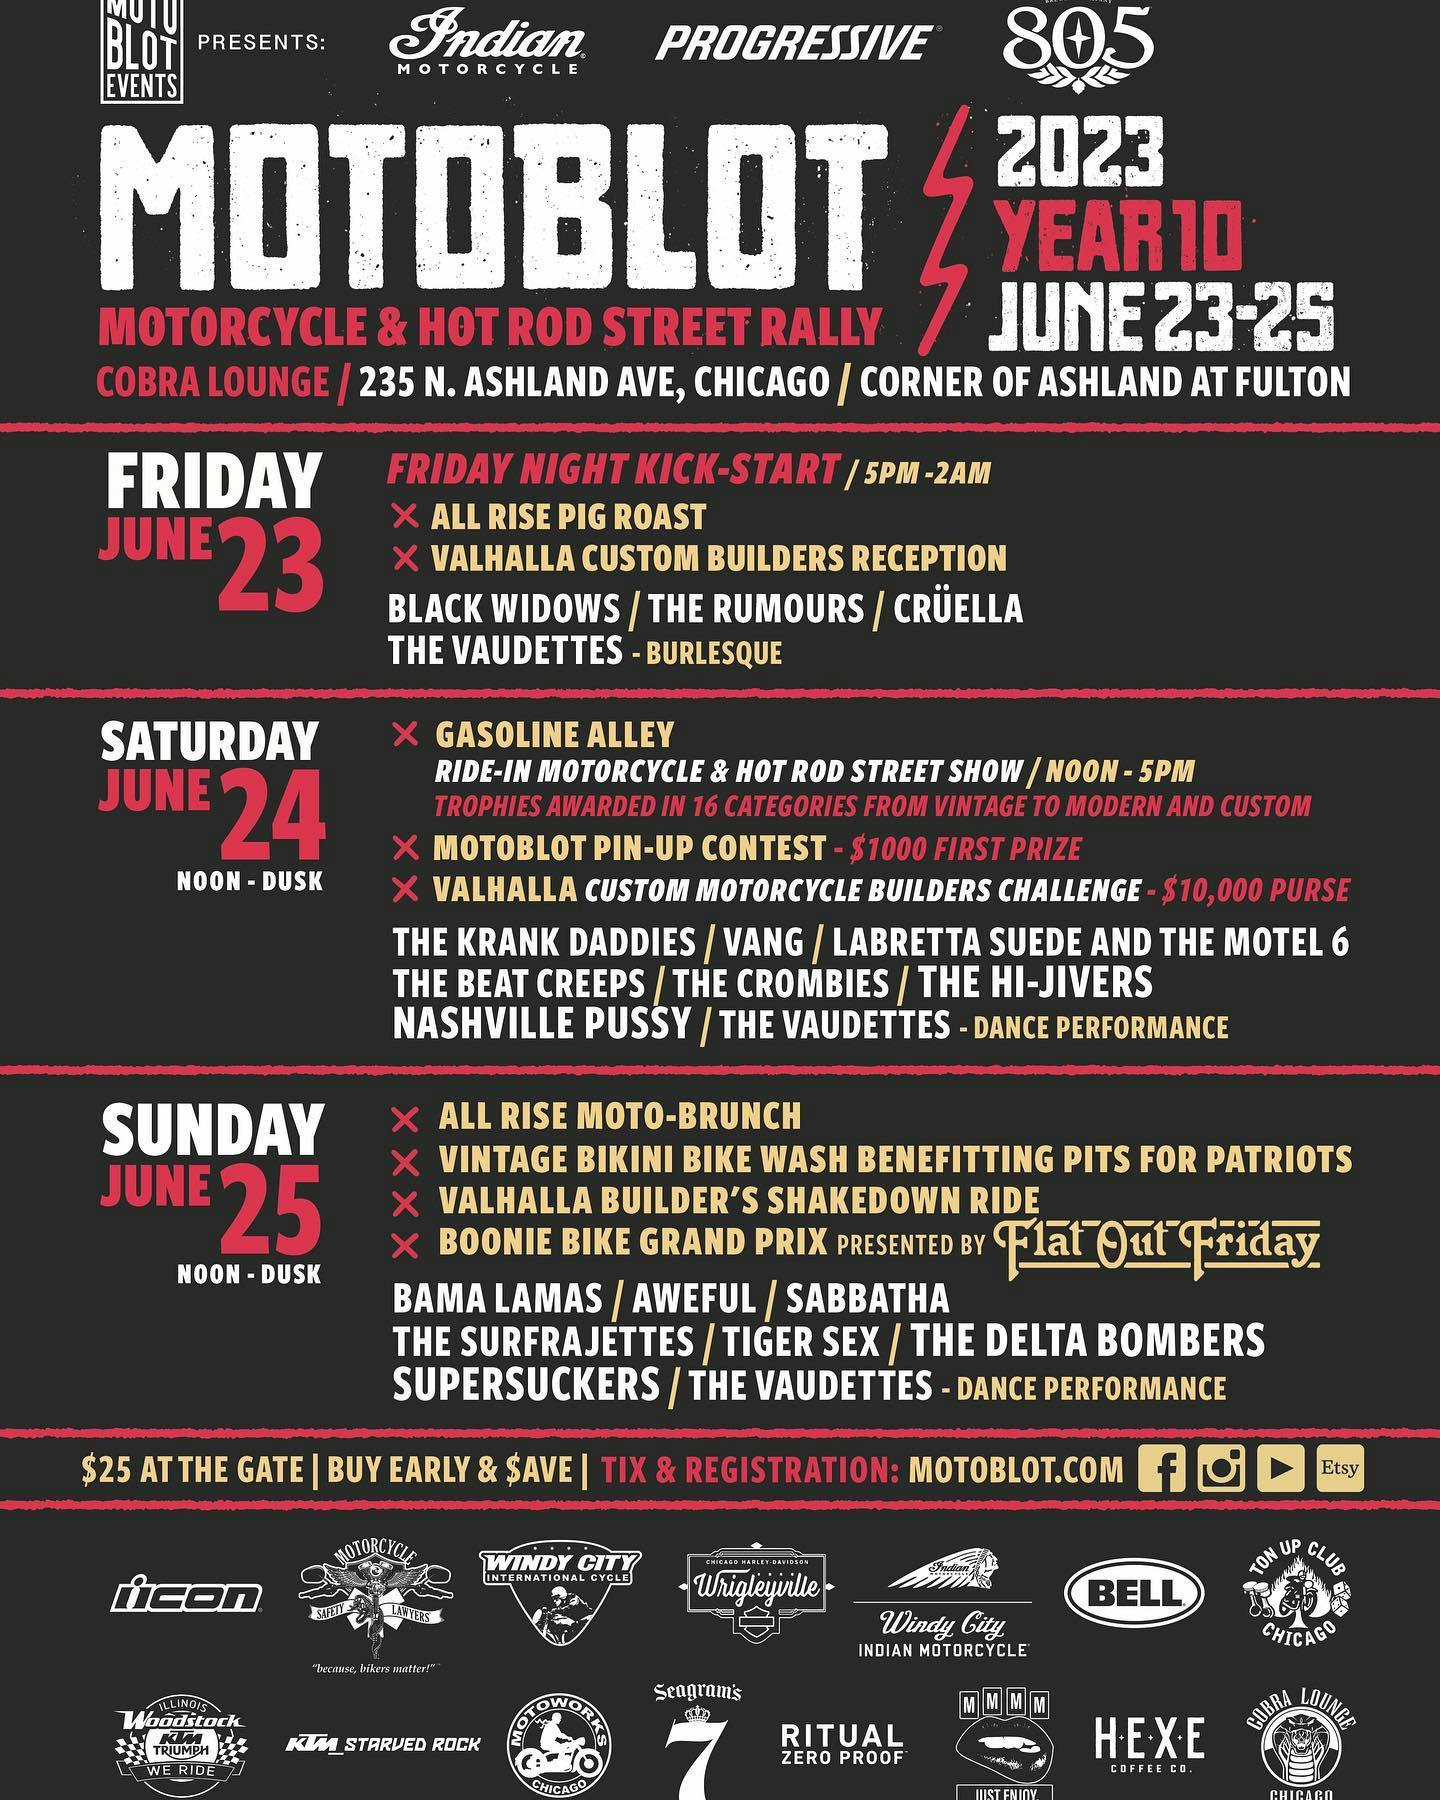 Come on! Don't miss the black widows or the Lambretta suede at the Motoblot 2023